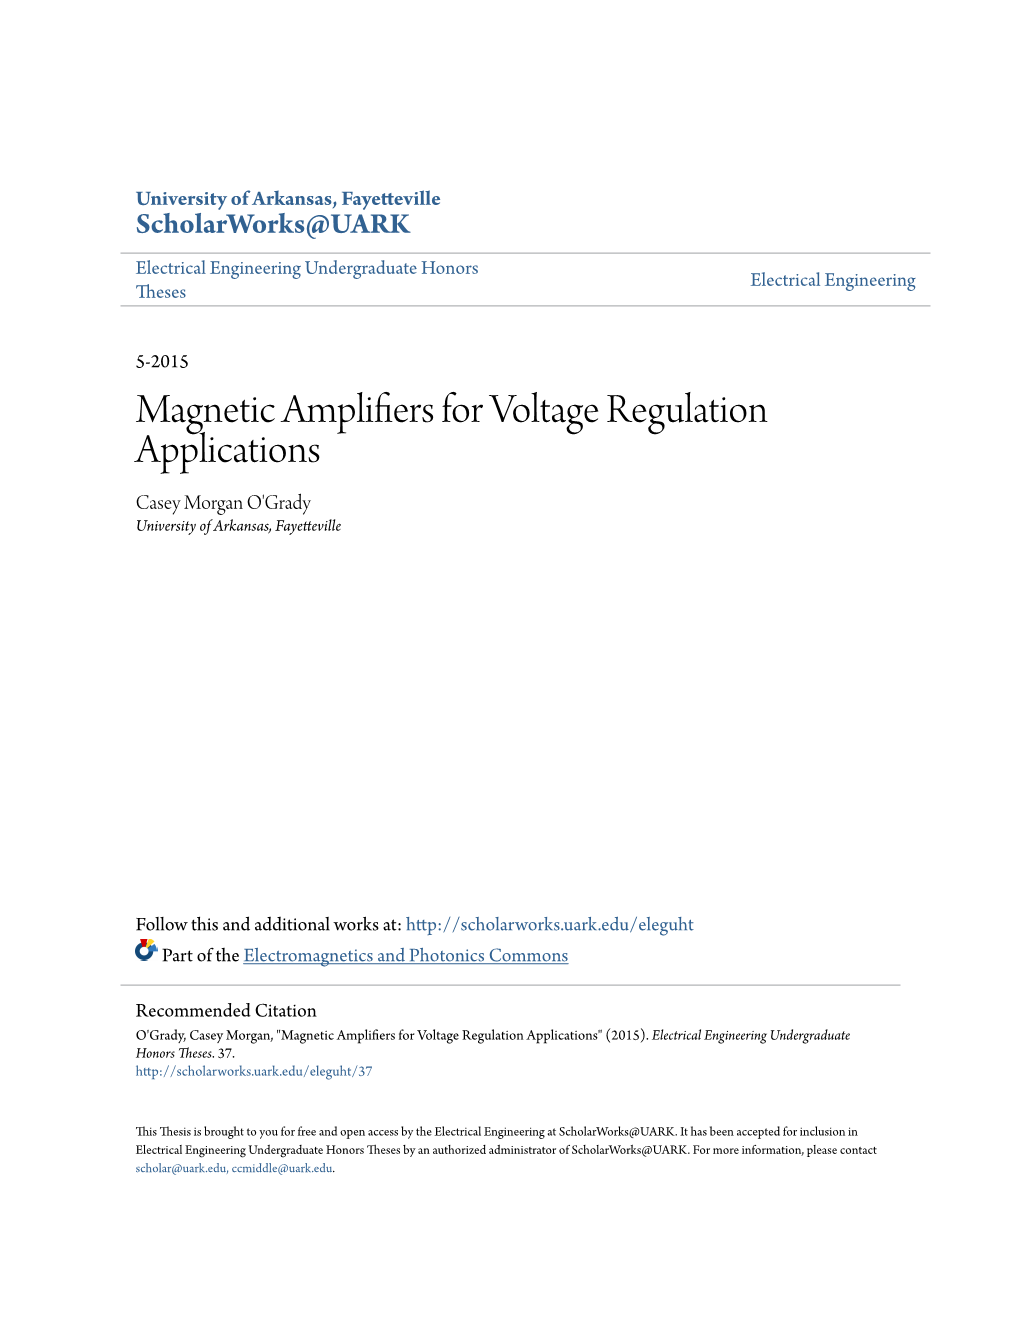 Magnetic Amplifiers for Voltage Regulation Applications Casey Morgan O'grady University of Arkansas, Fayetteville